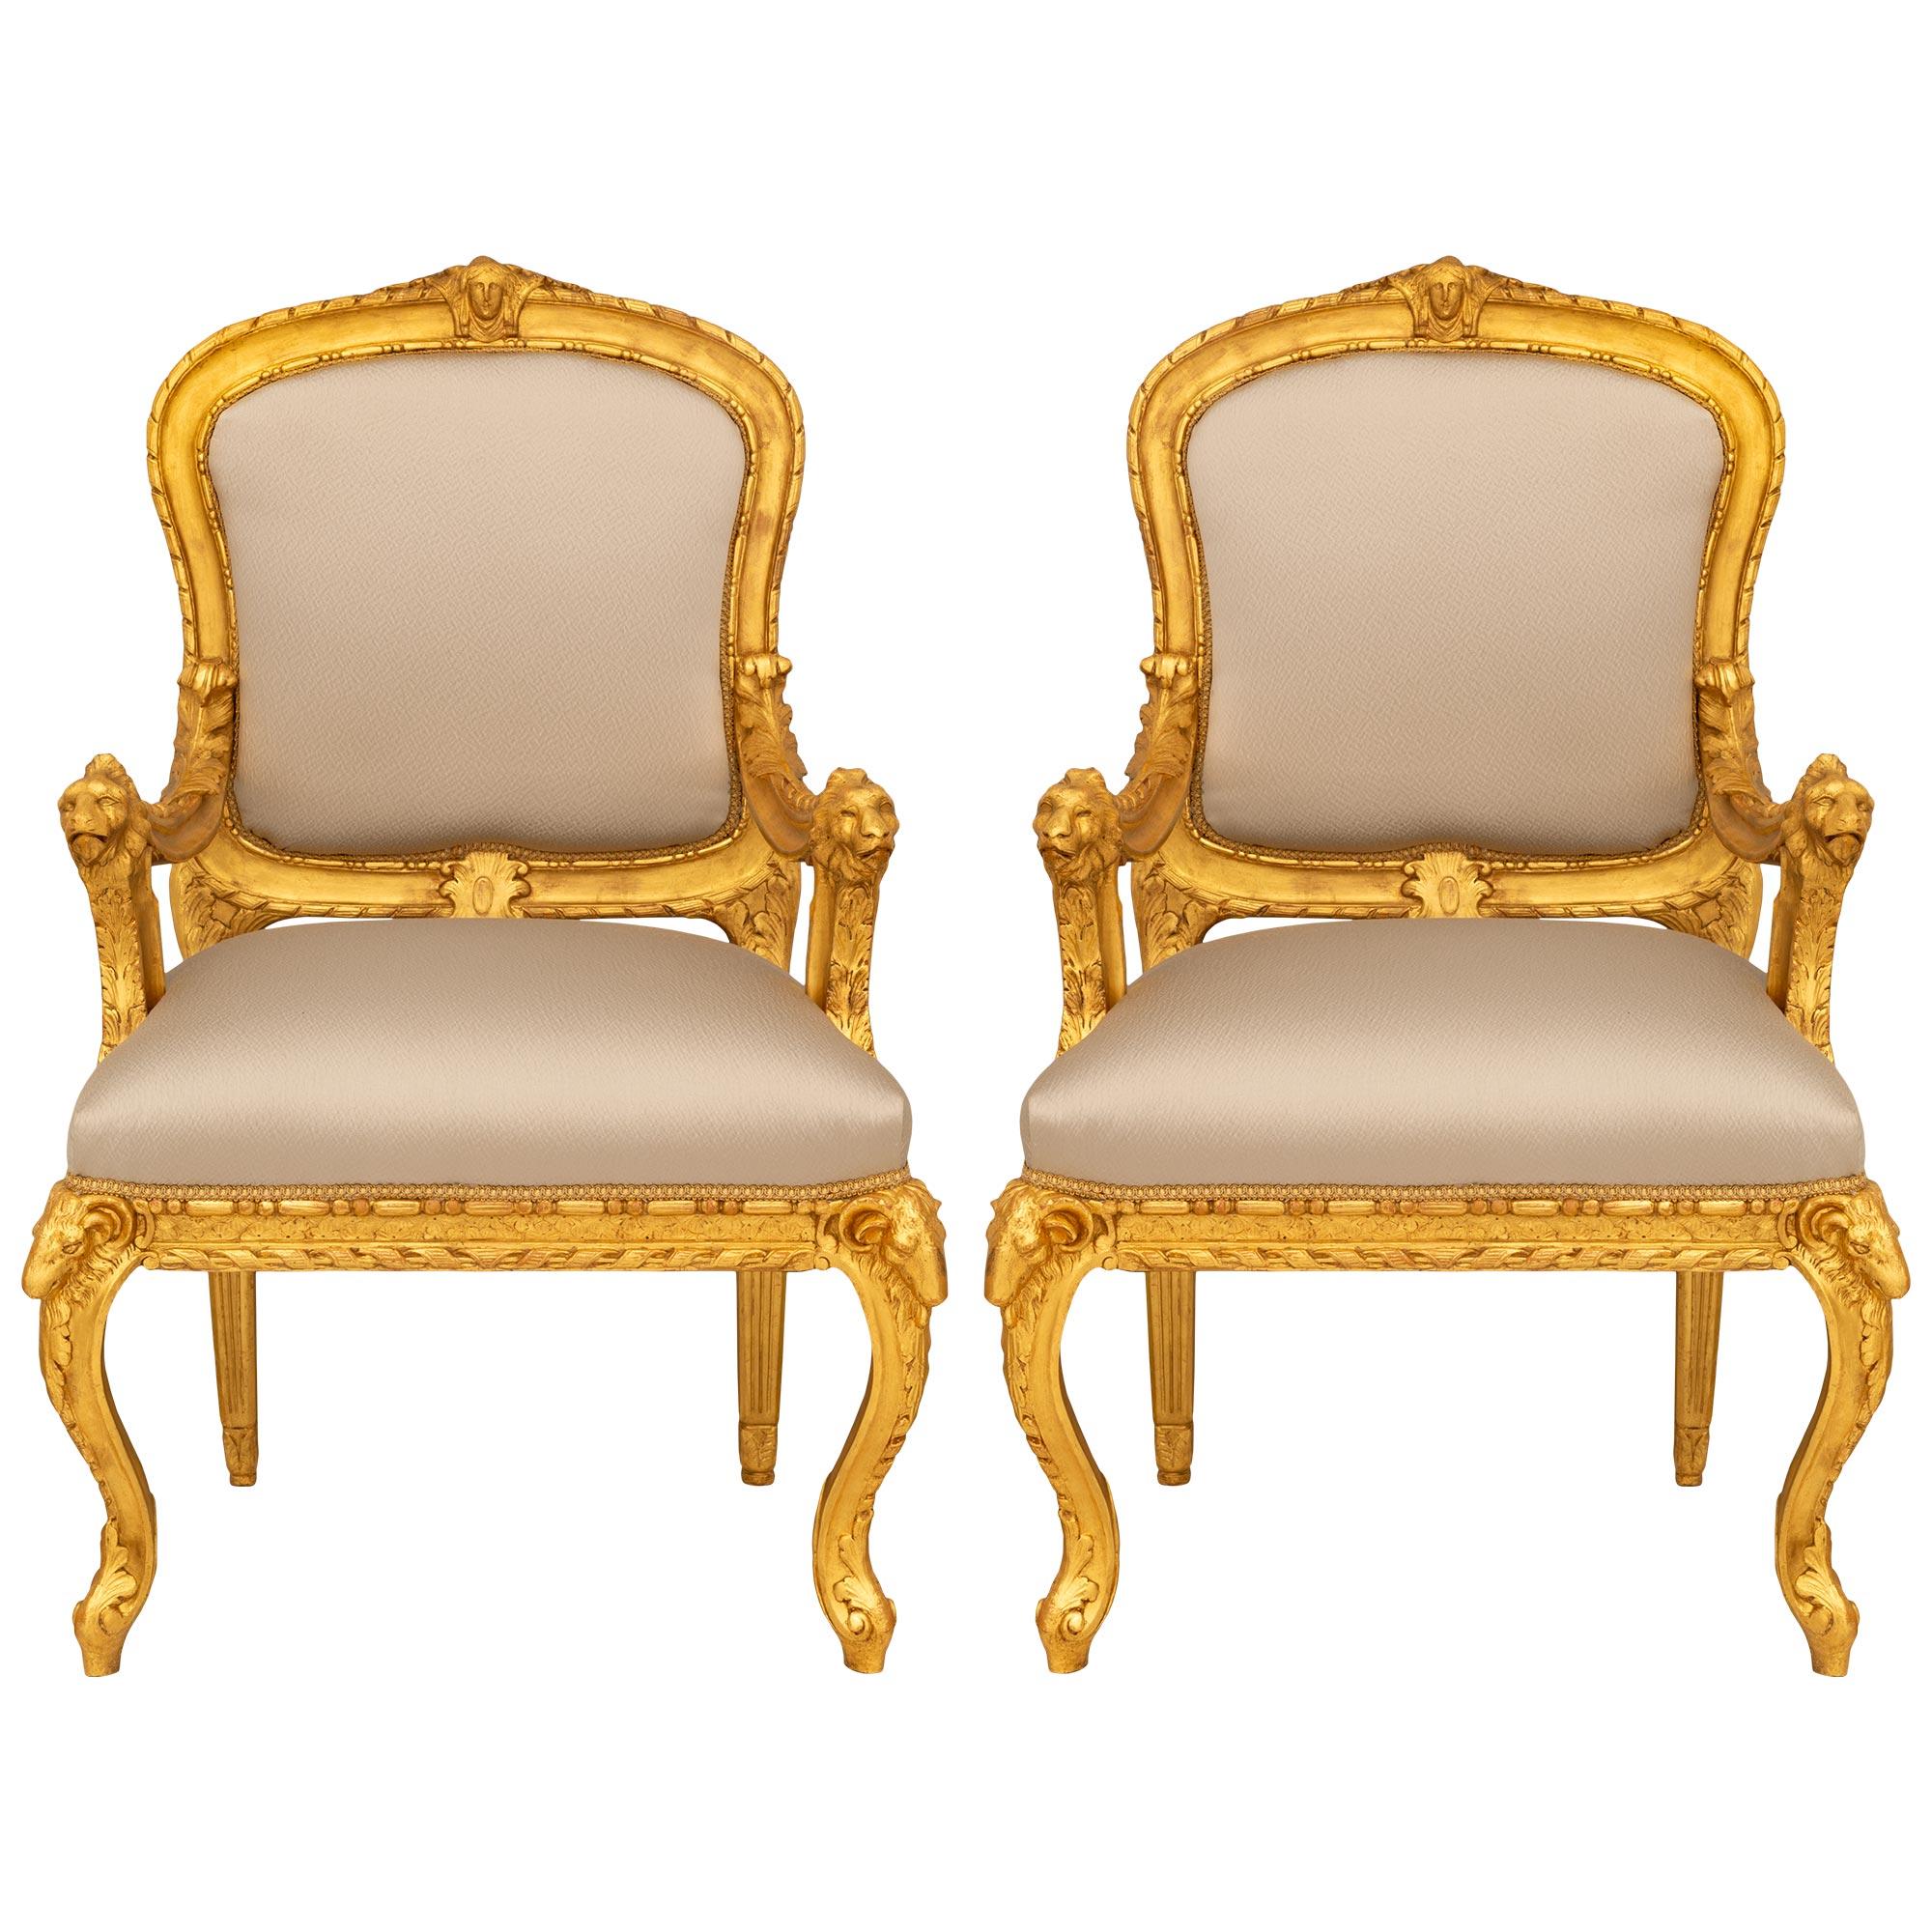 Pair Of Italian Early 18th Century Baroque Period Giltwood Armchairs For Sale 7